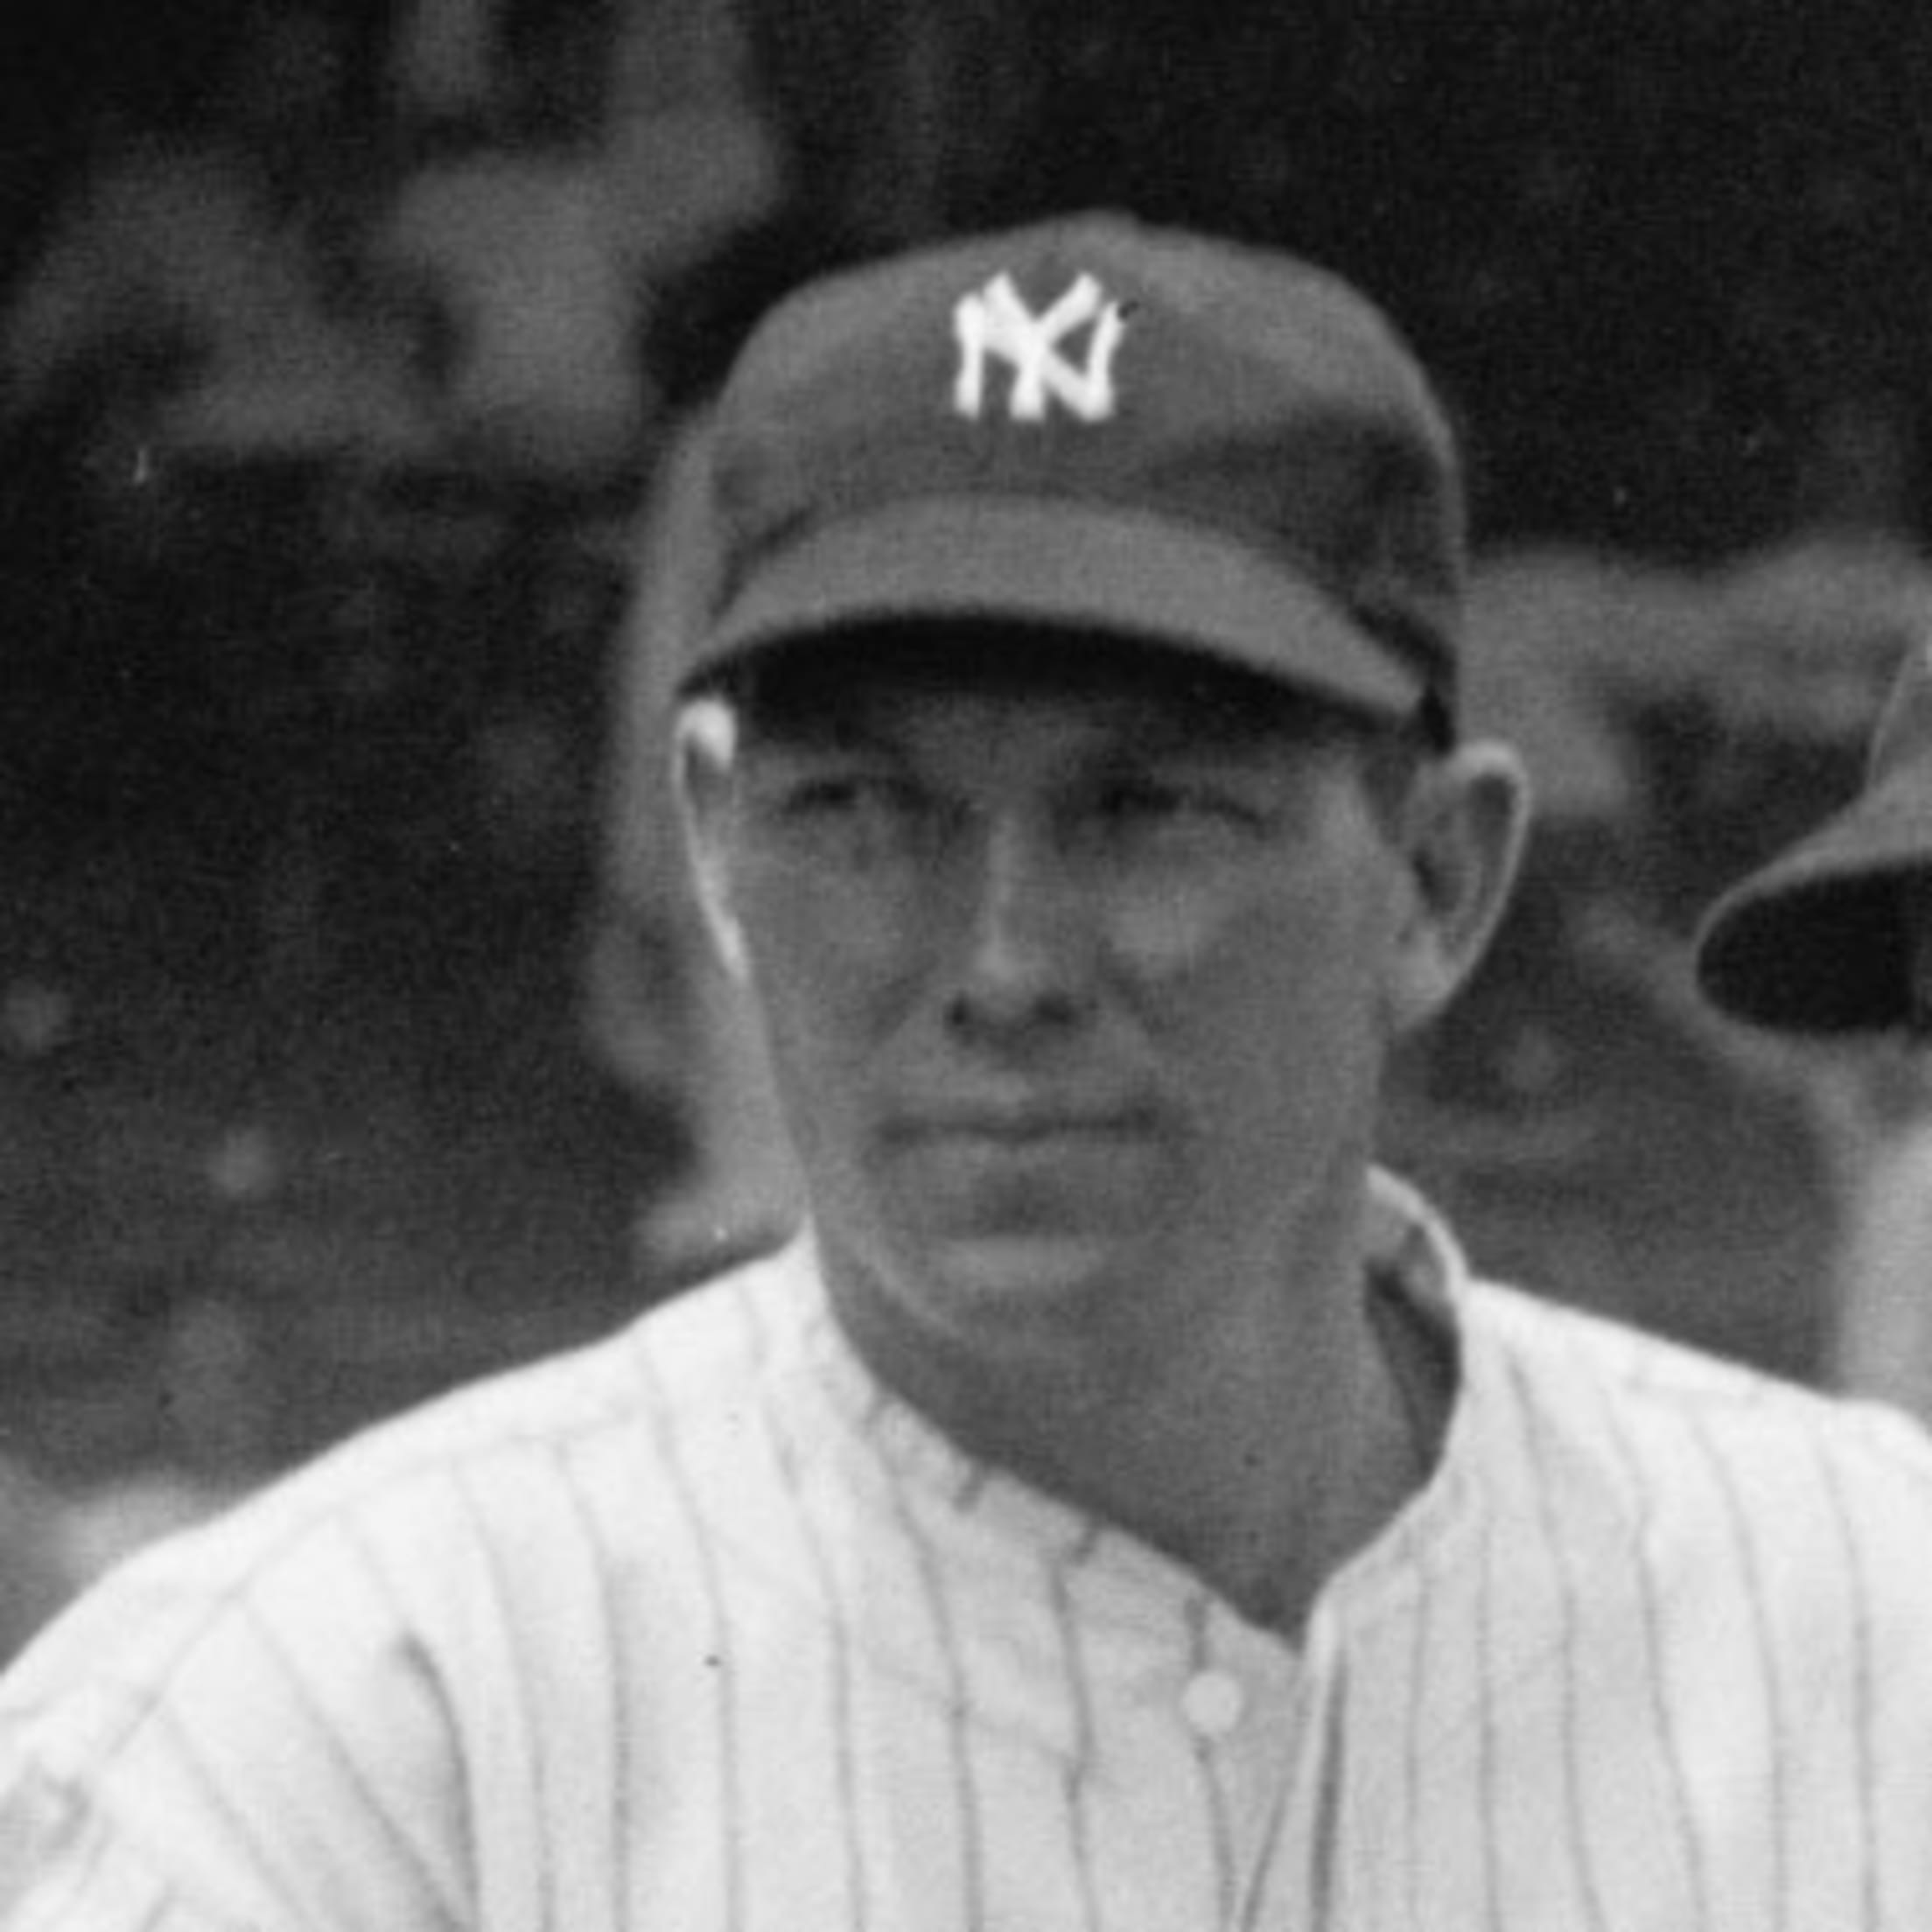 The 'New York Yankees retired numbers' quiz